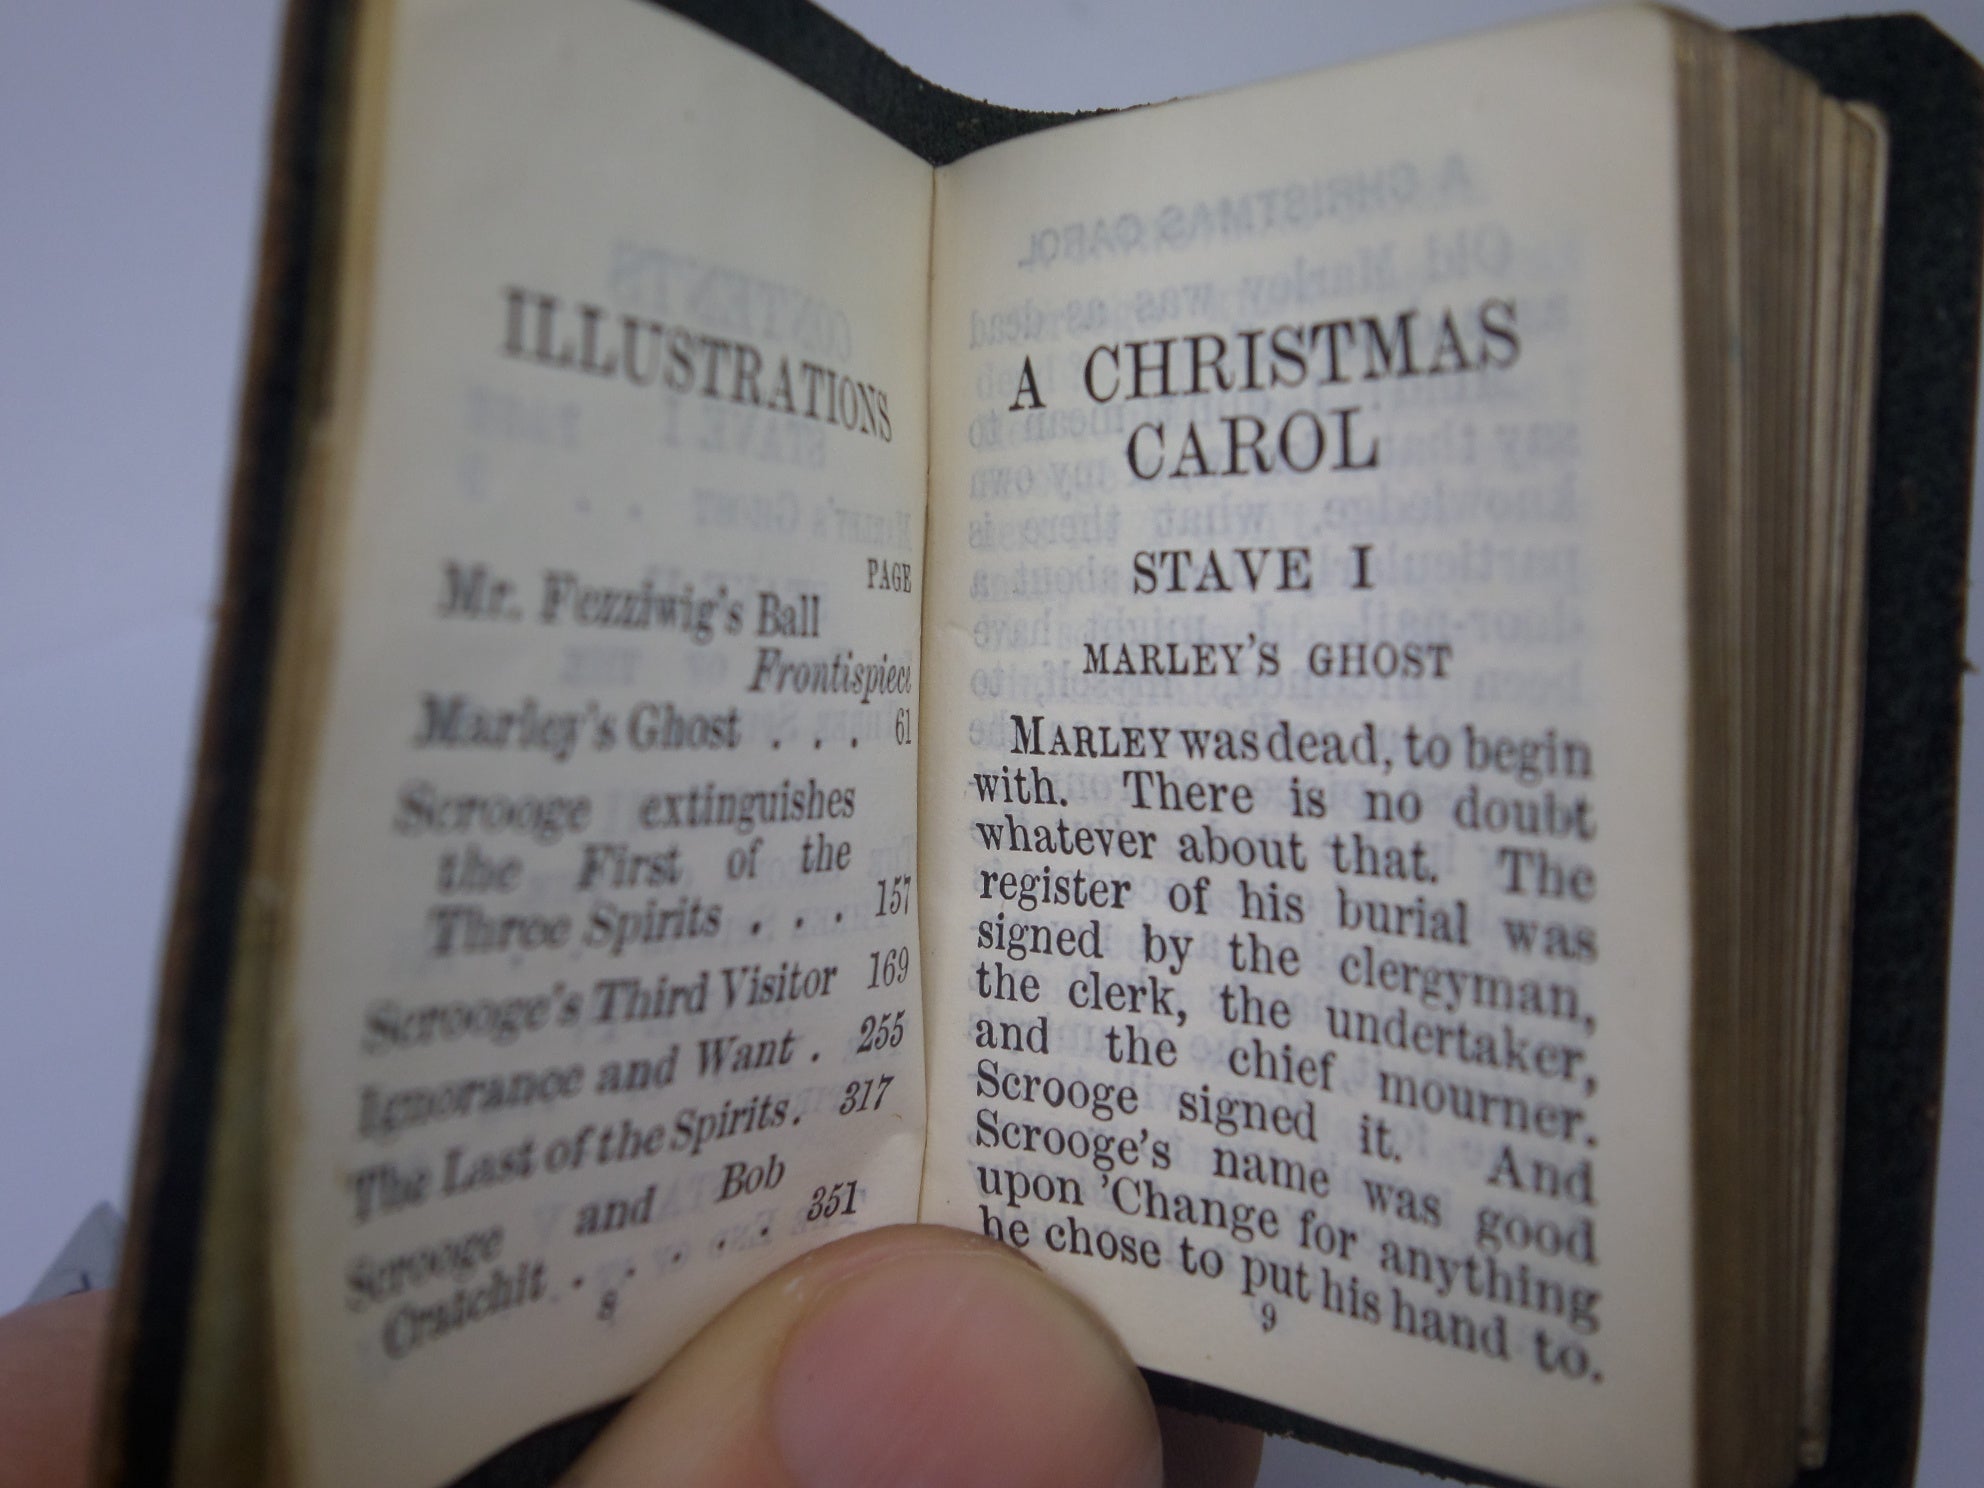 A CHRISTMAS CAROL BY CHARLES DICKENS 1904 MINIATURE EDITION, LEATHER BINDING